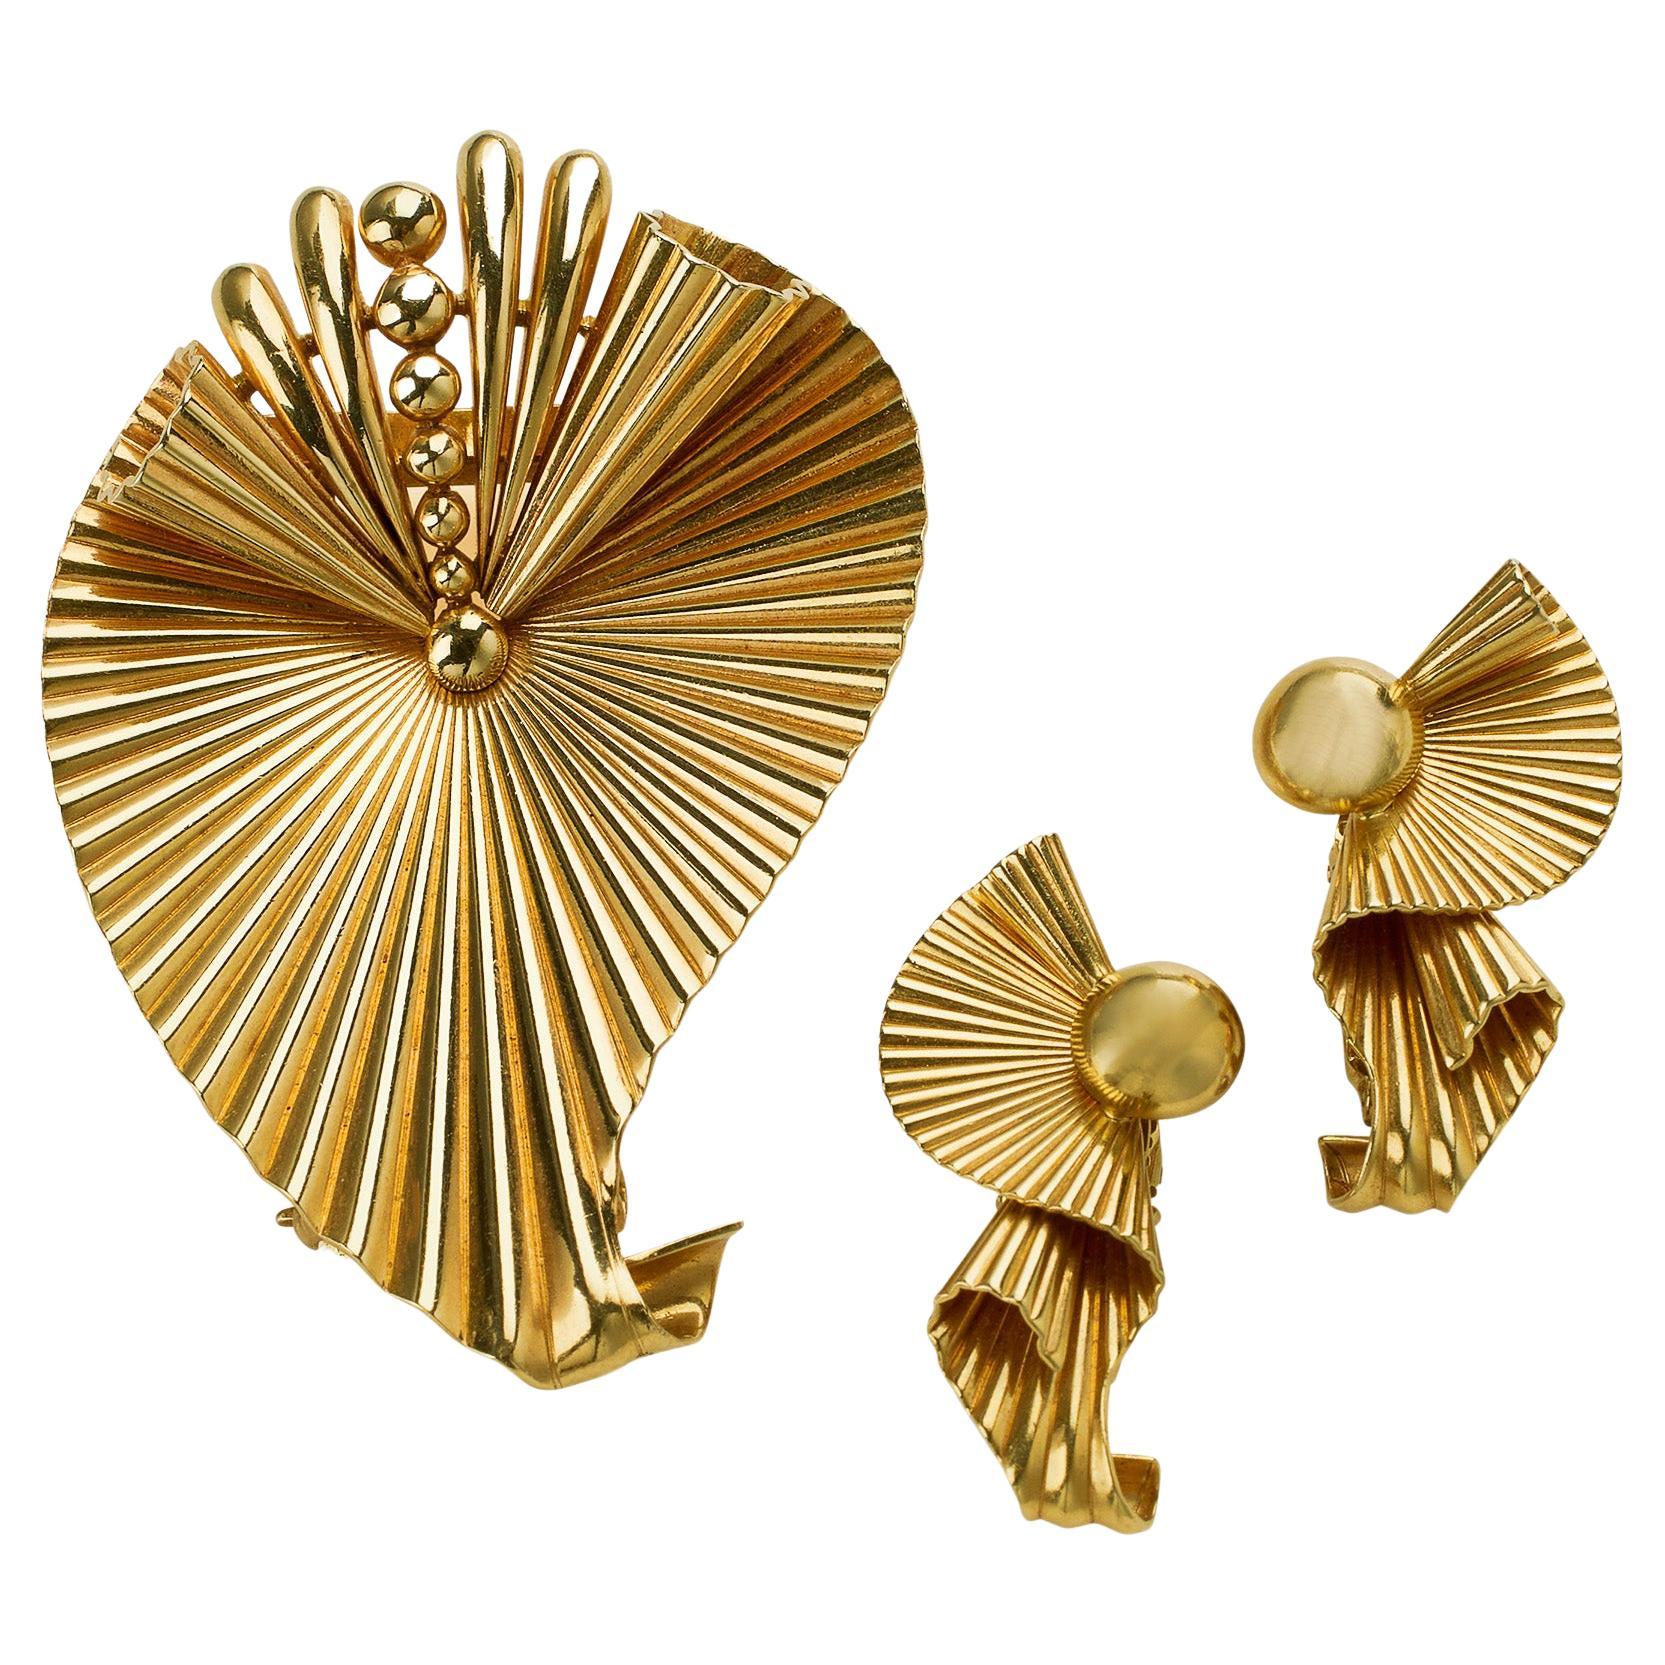 Tiffany & Co. Retro Gold Clip Earrings and Brooch